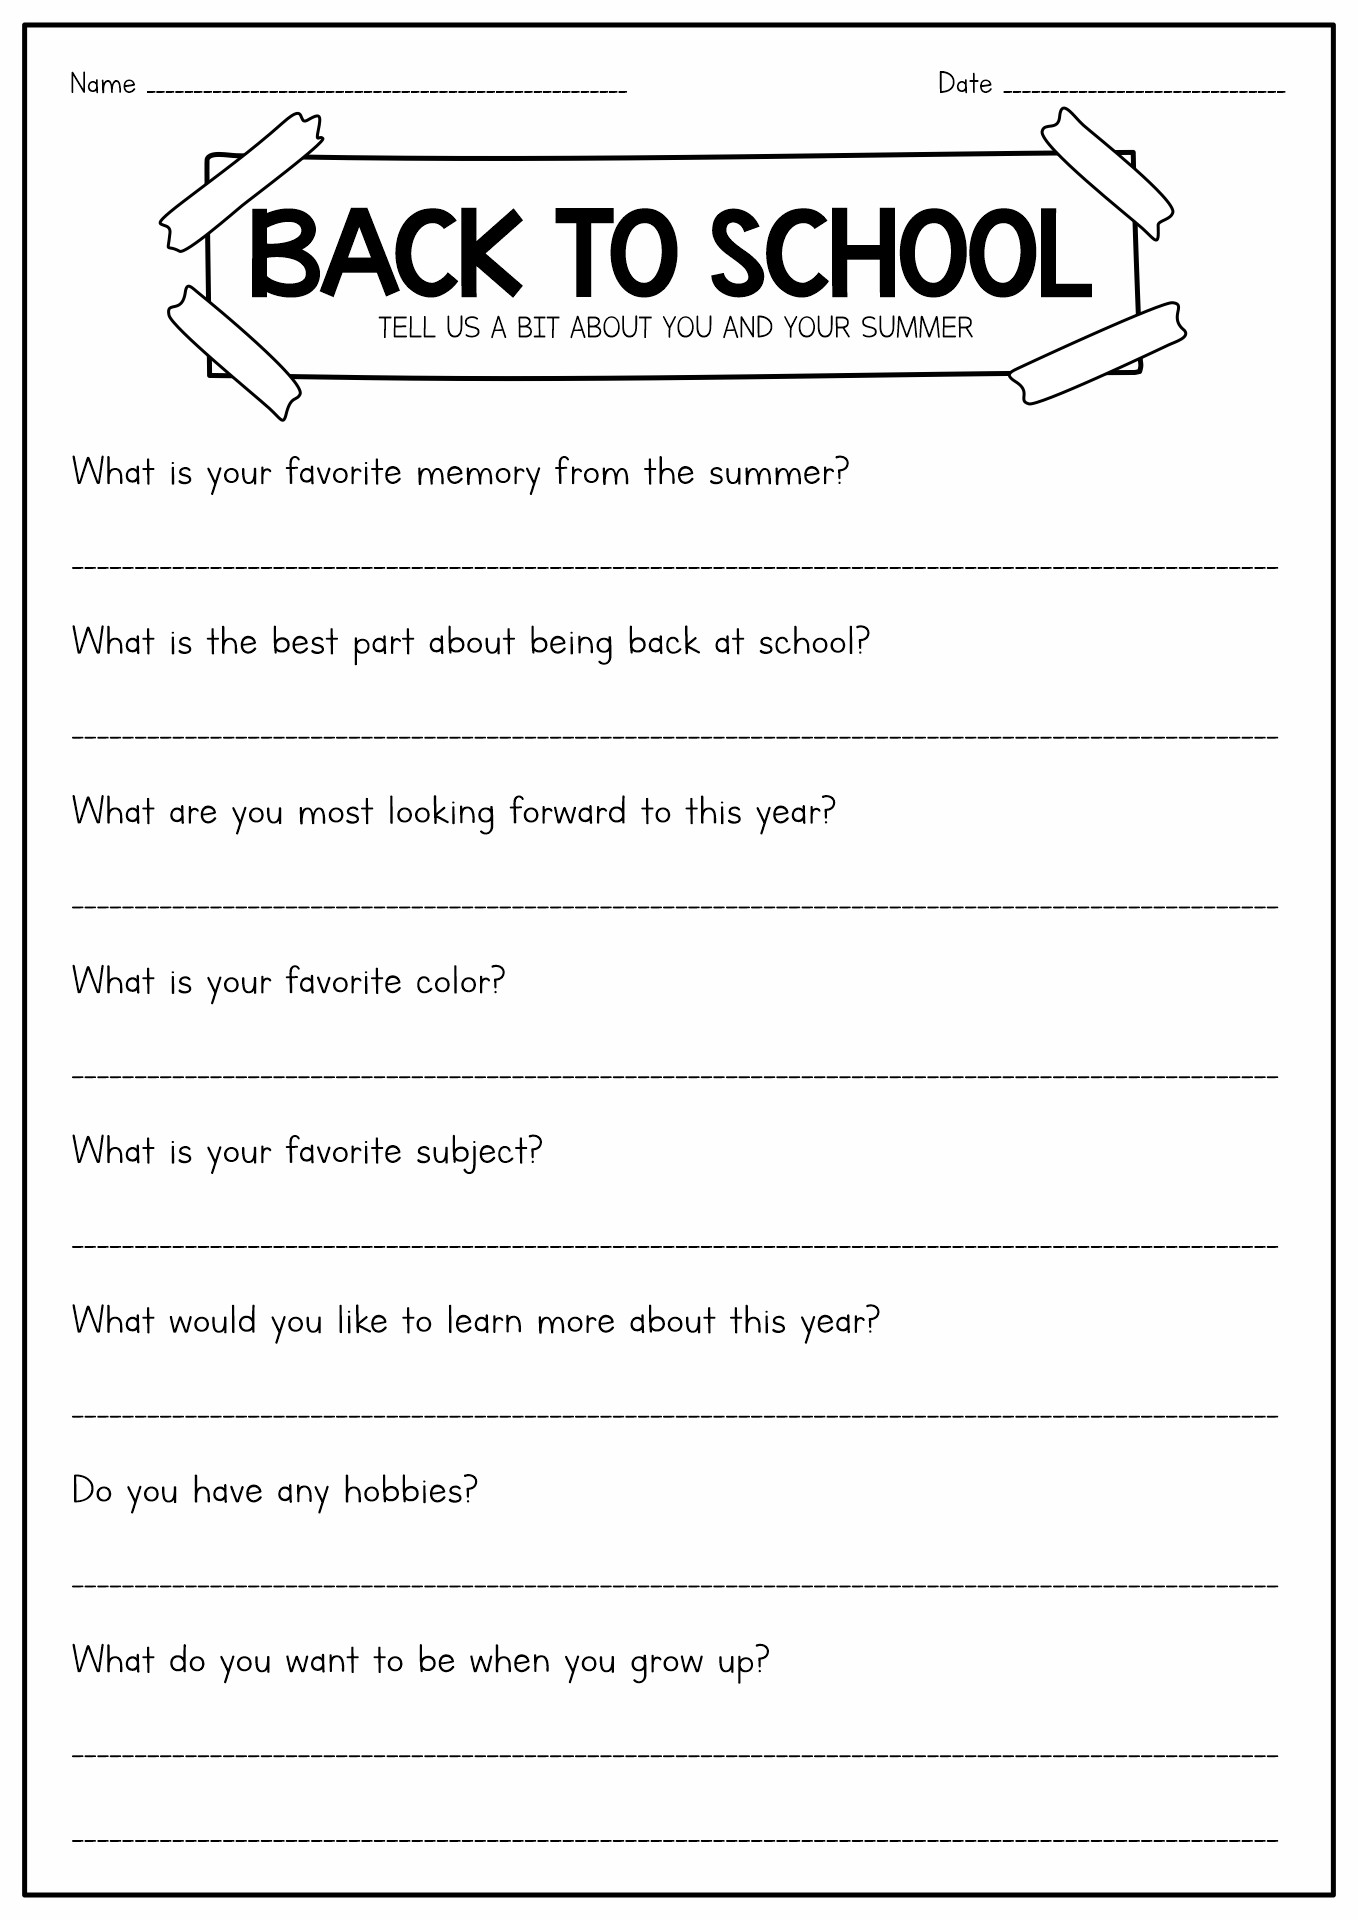 Back to School Worksheets Free Image